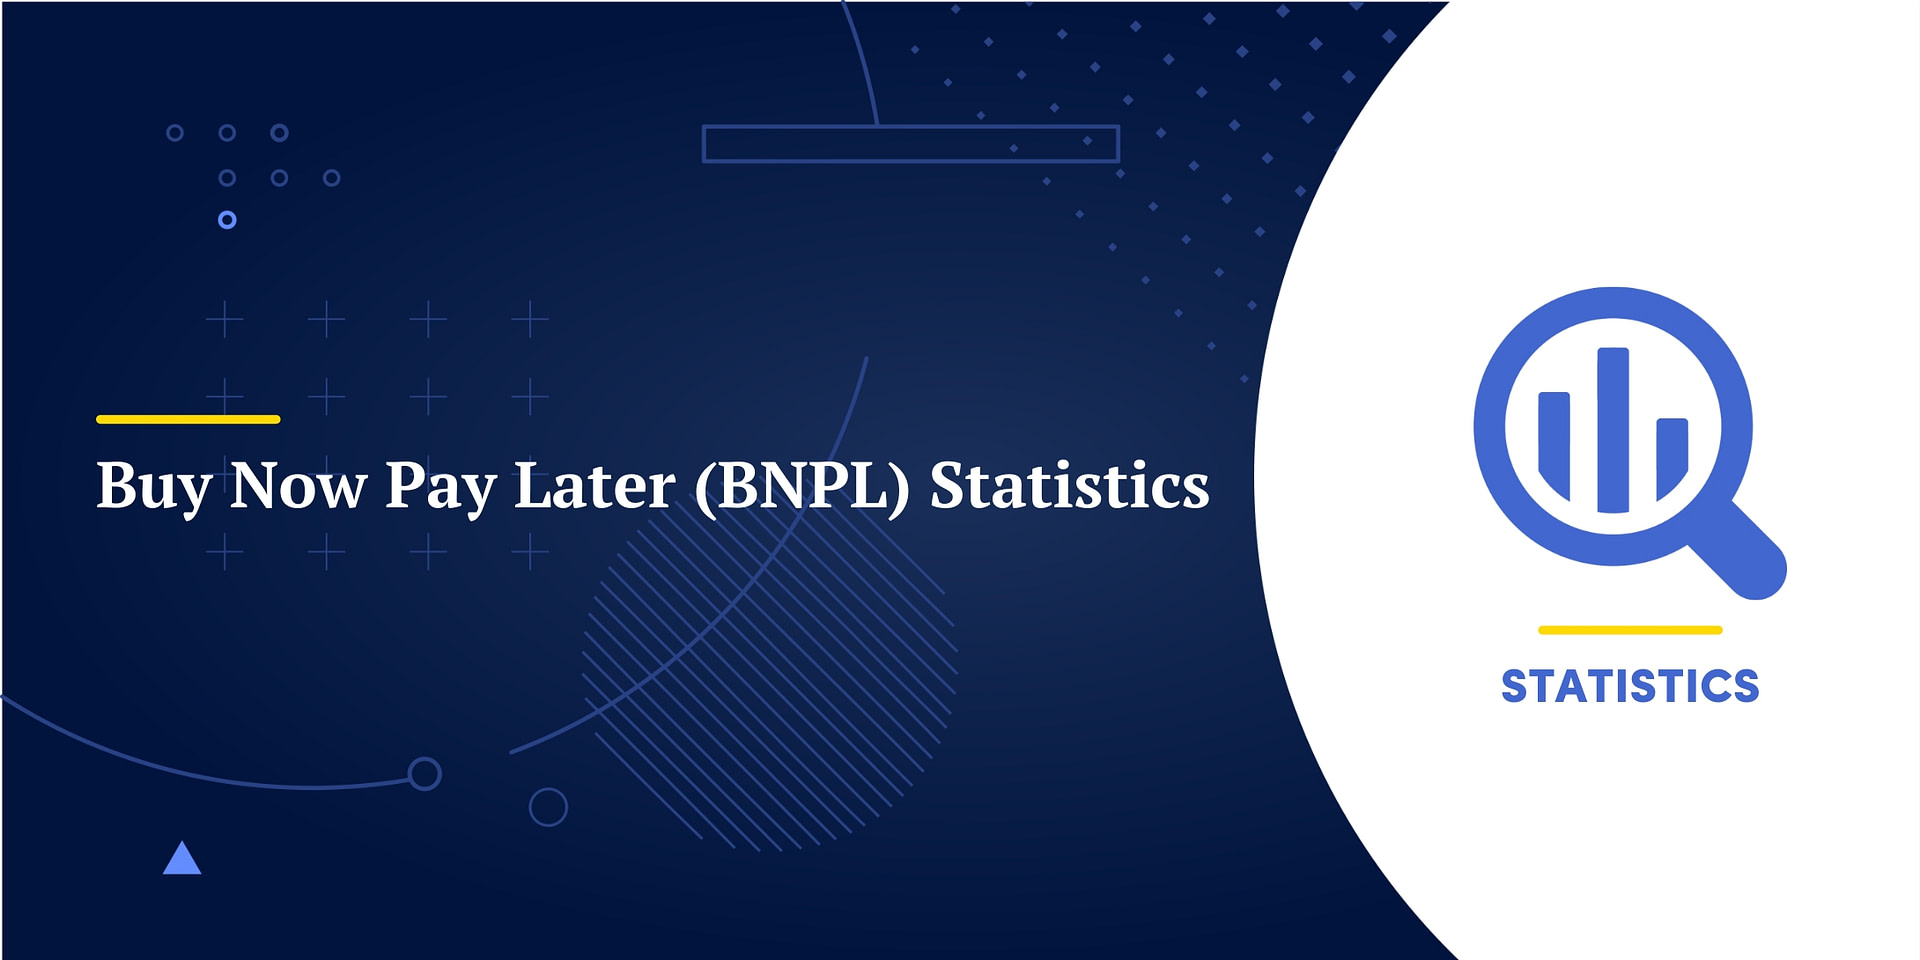 Purchase Now Pay Later (BNPL) Statistics